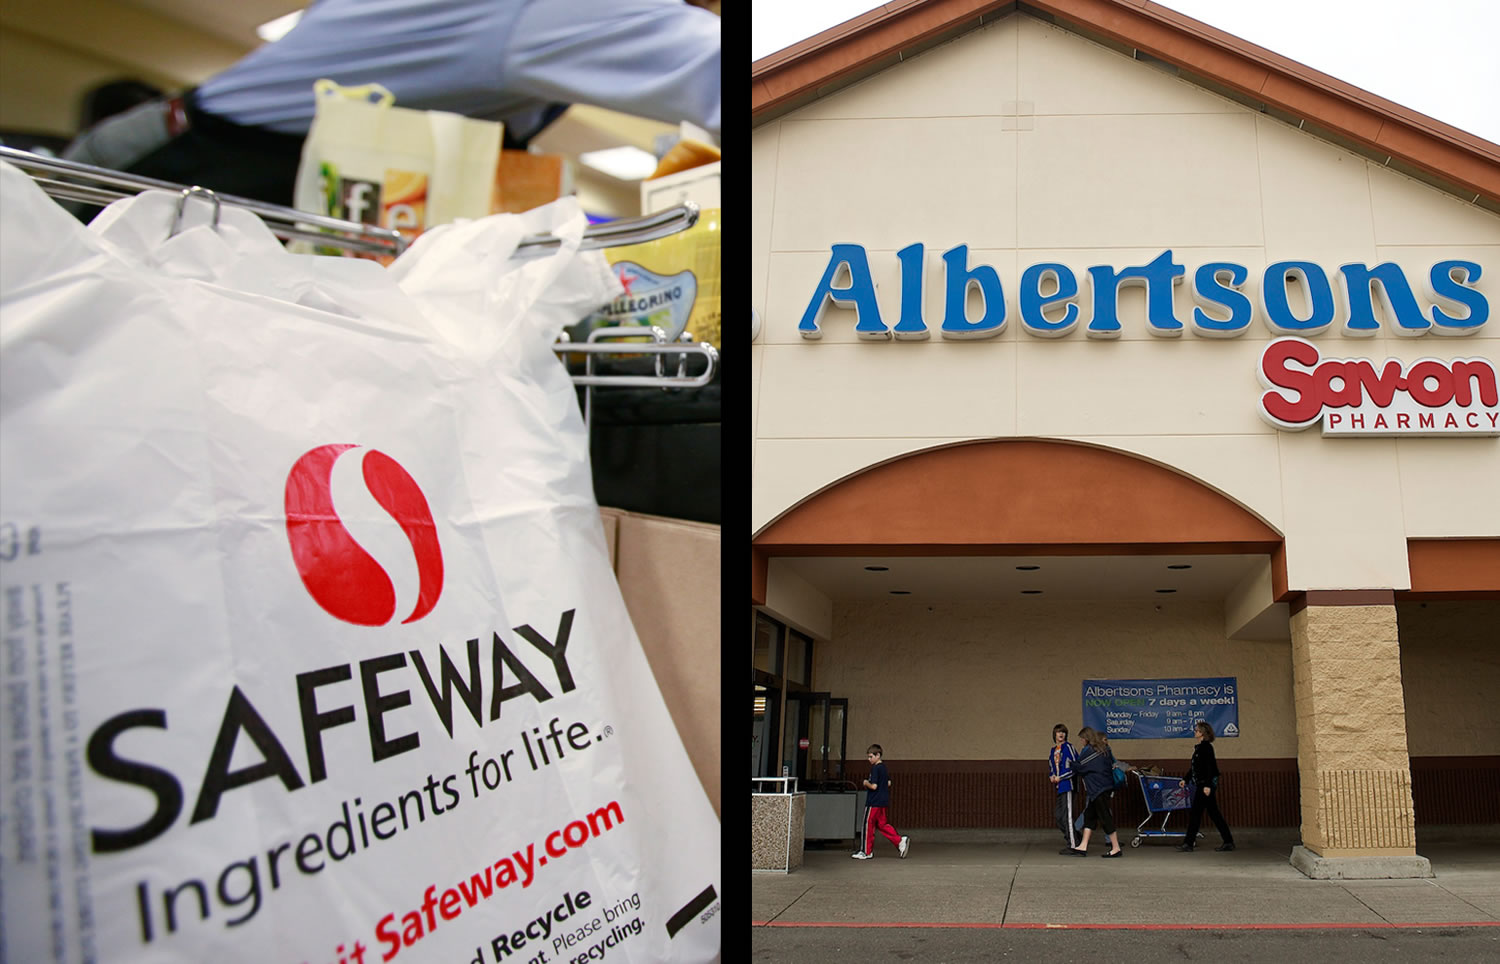 Grocery store chains Safeway and Albertsons today announced an agreement to merge.